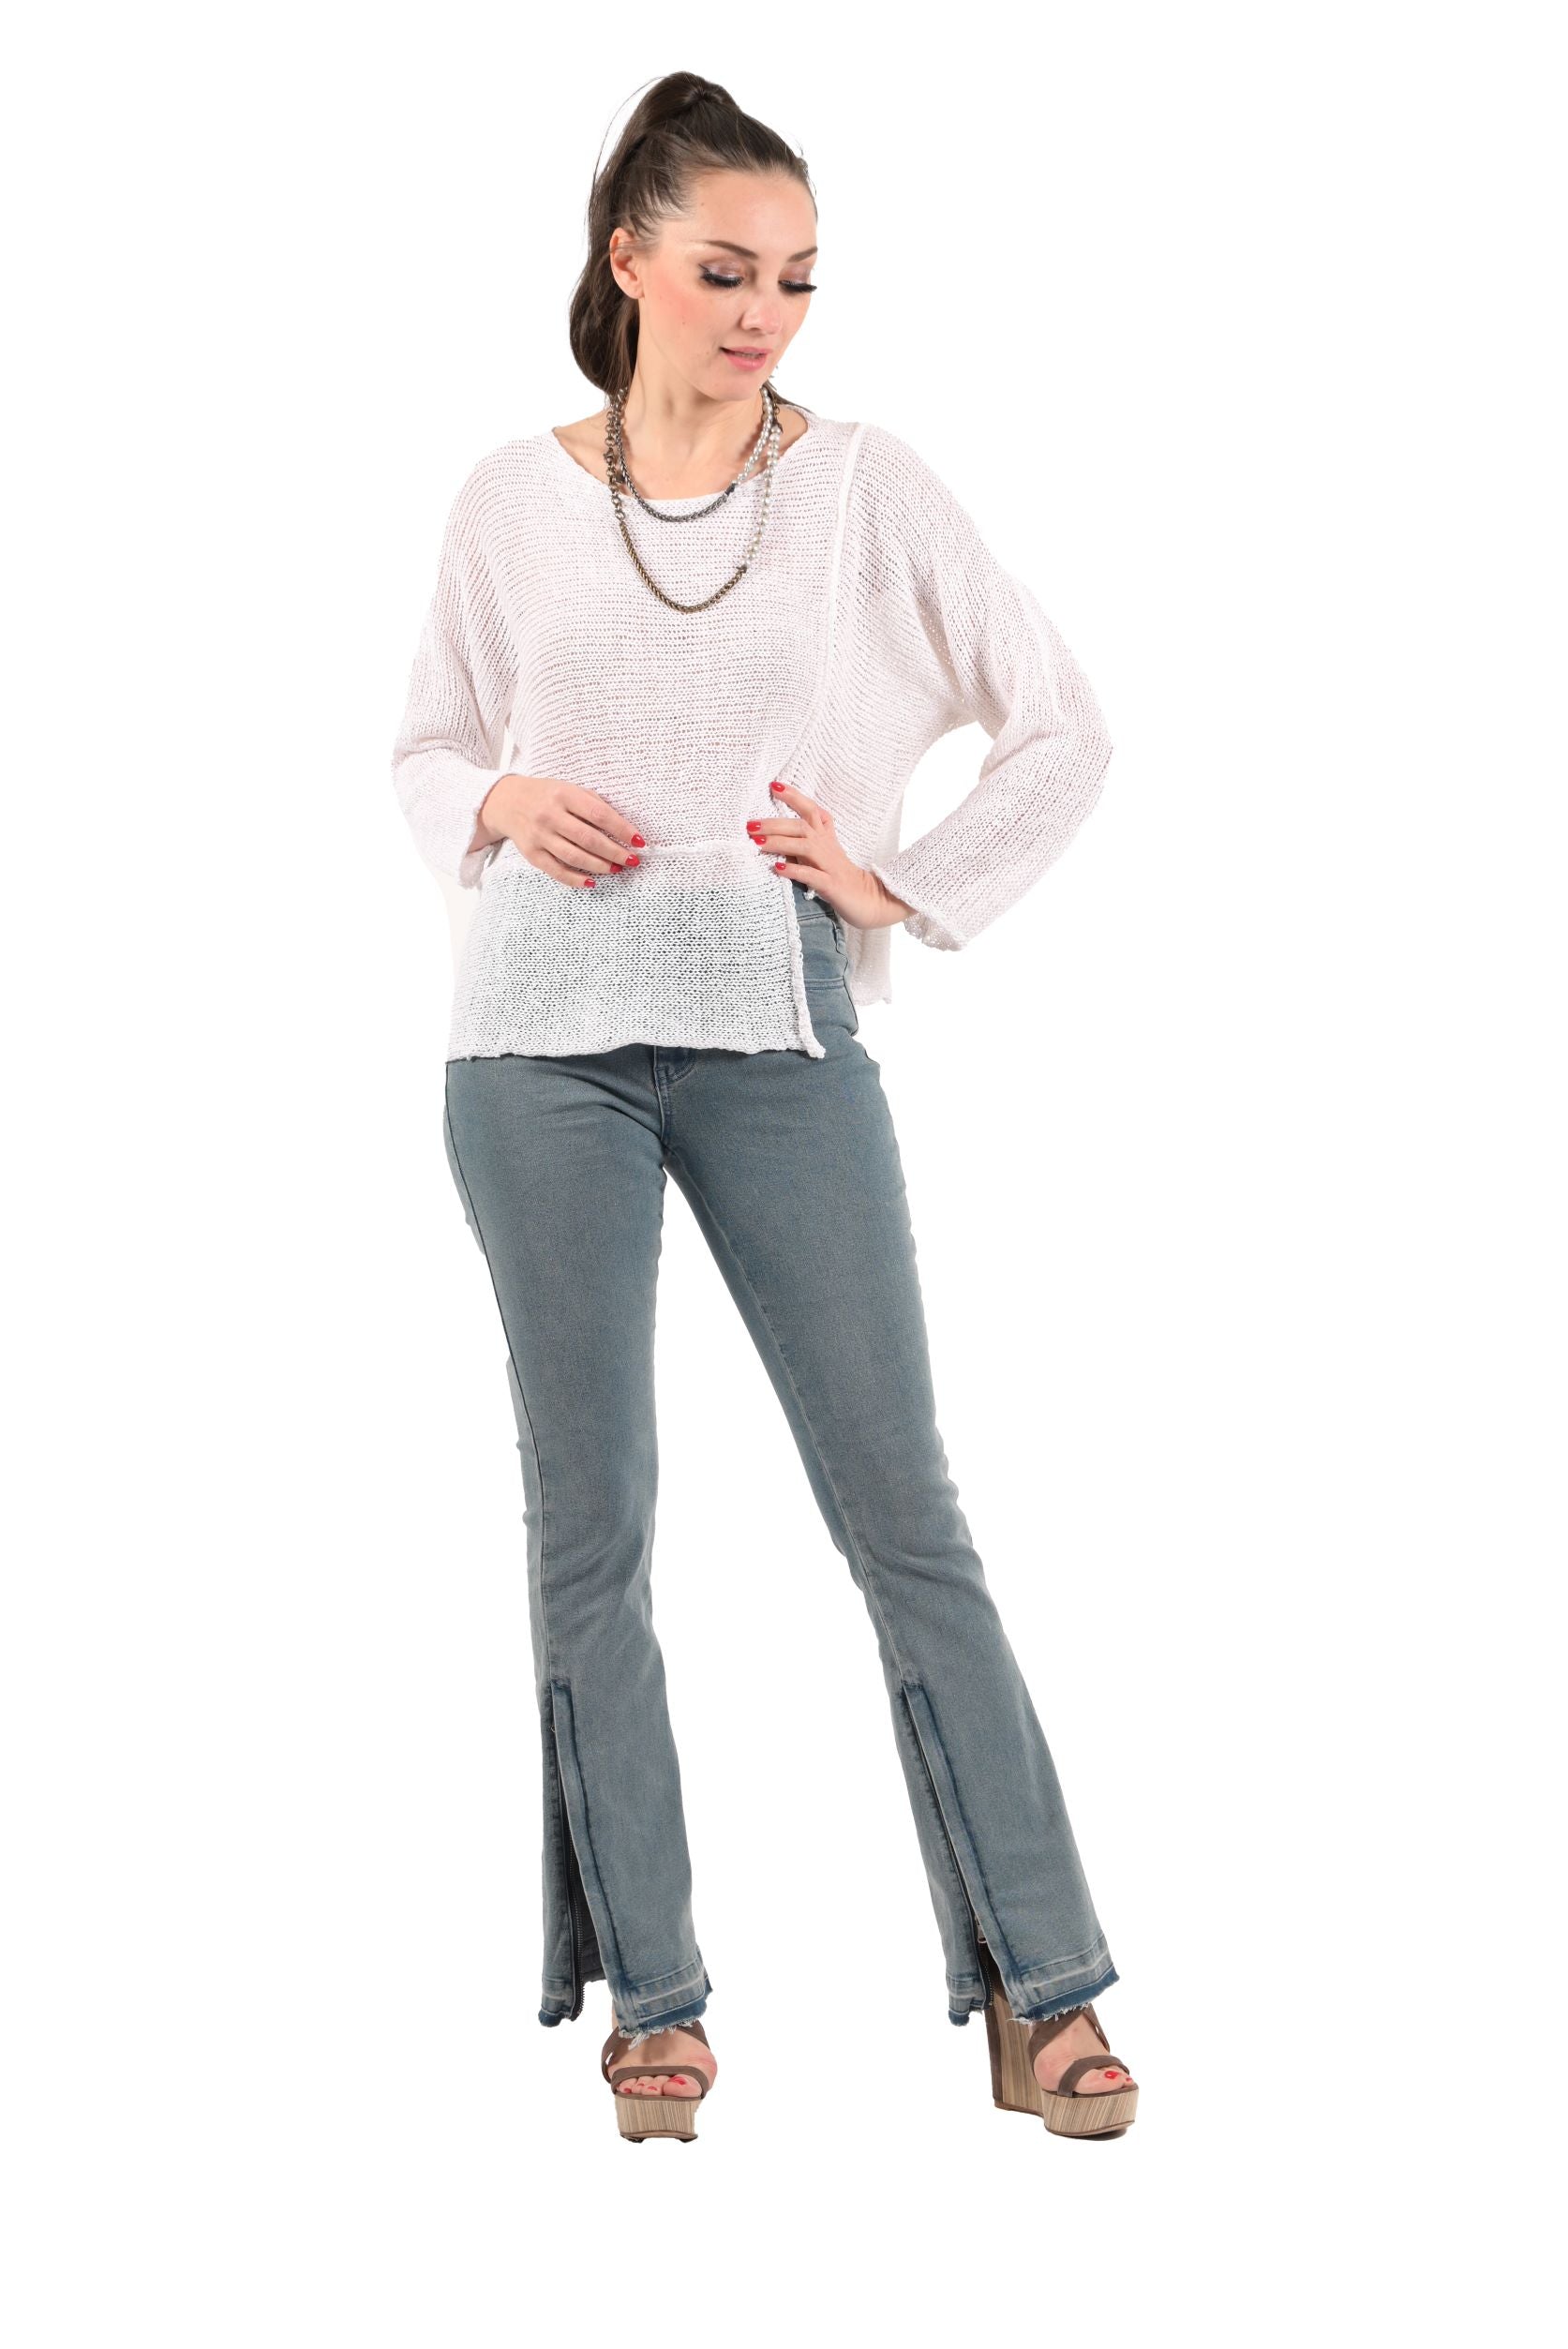 Denim Comfort Fit Flare Jeans with Two Zippers and Frayed Bottoms